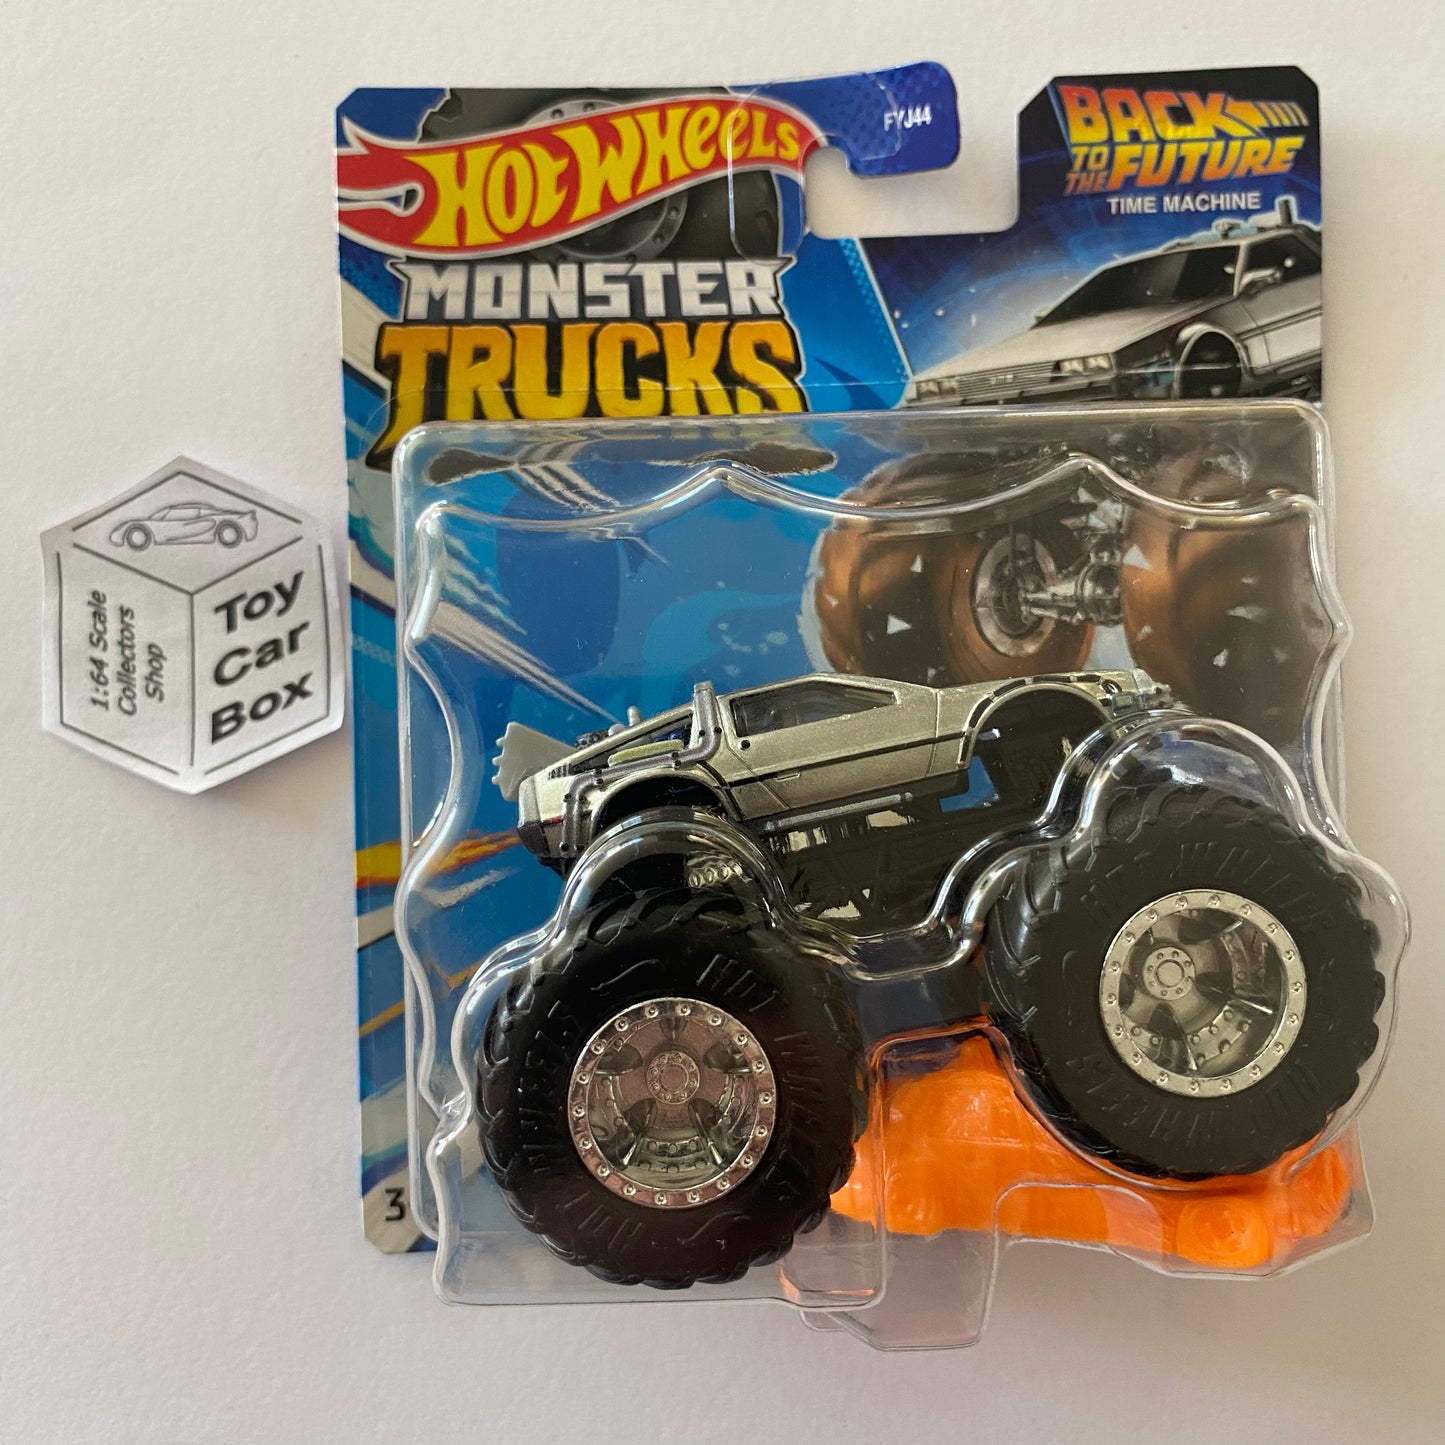 2023 HOT WHEELS Monster Trucks - Back To The Future Time Machine (Silver) E00